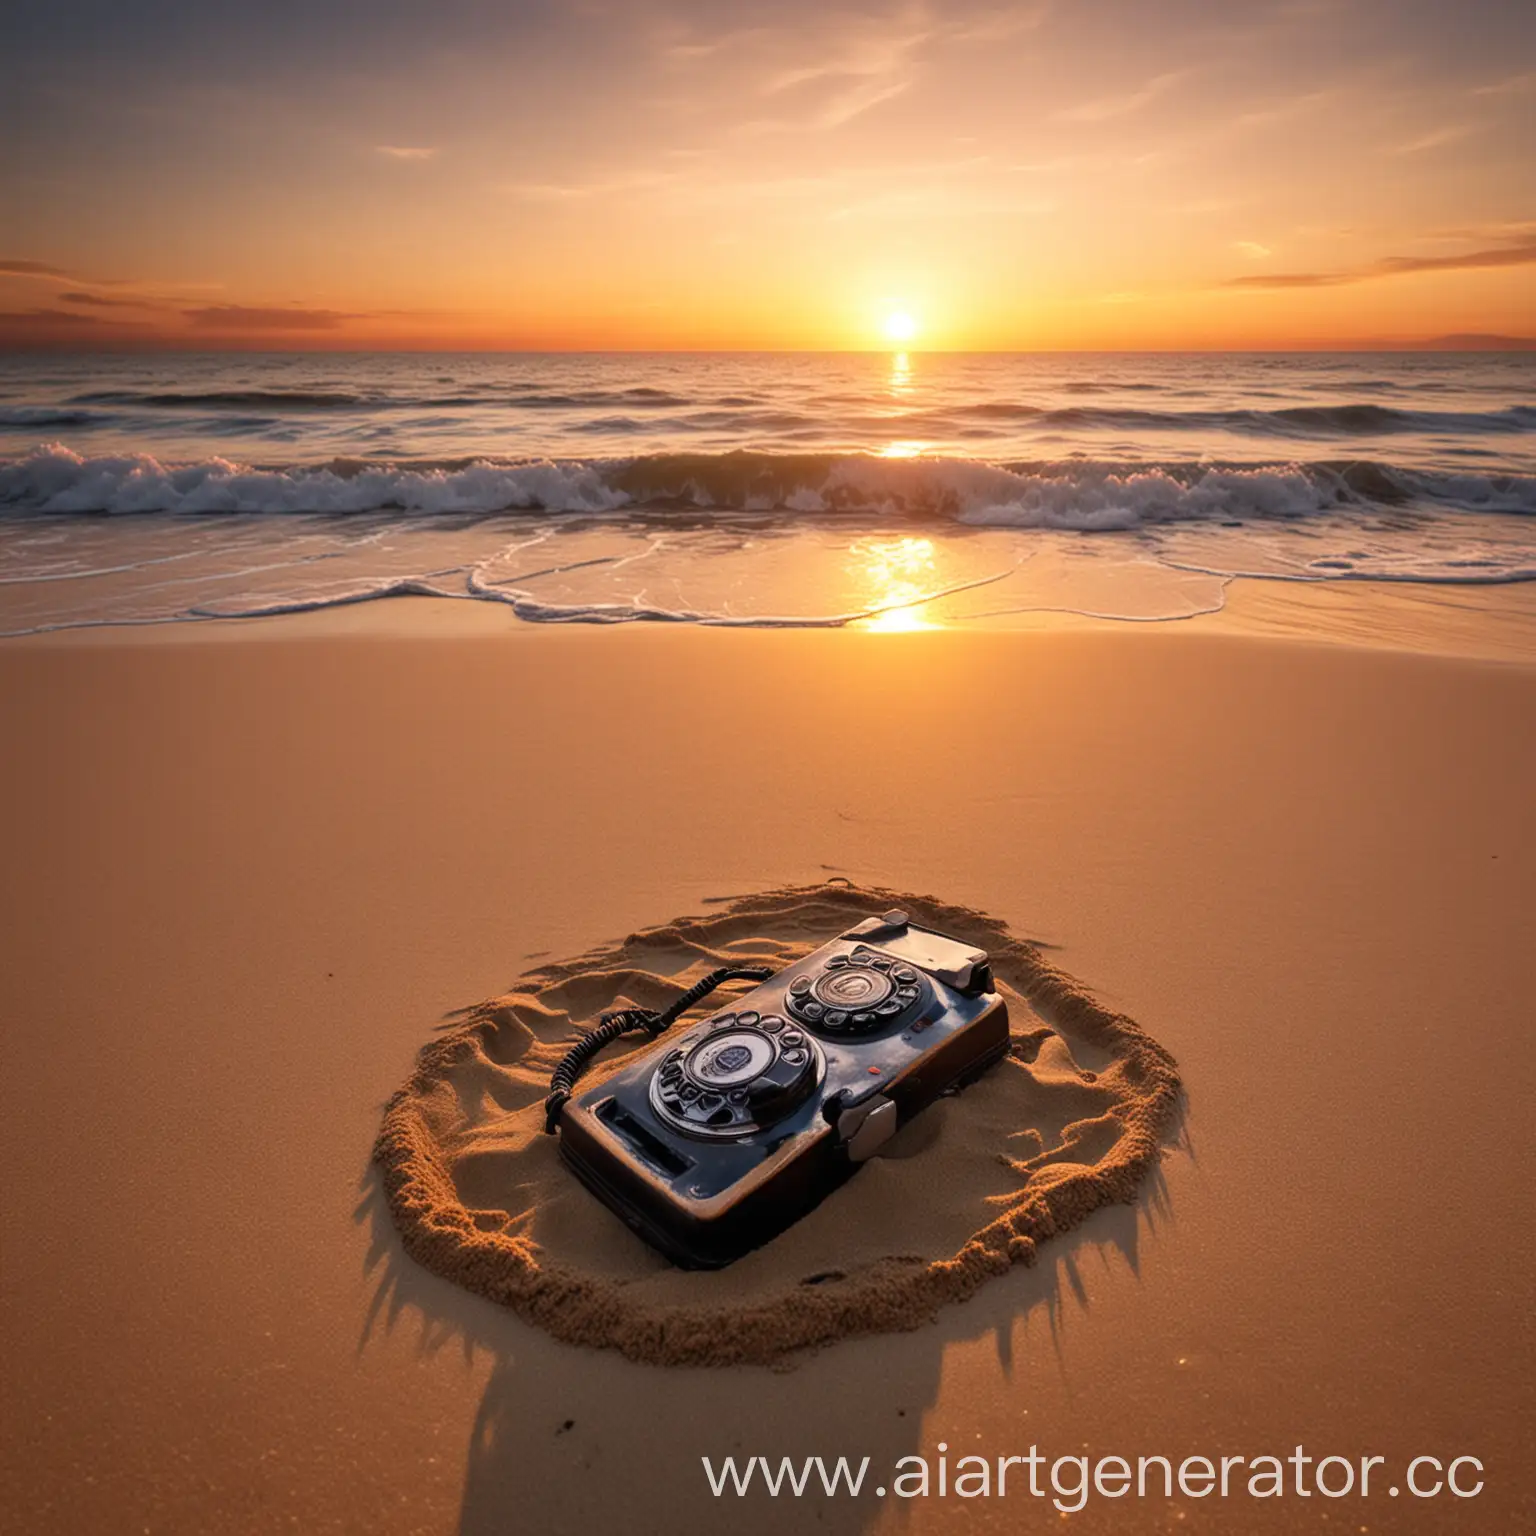 Picture-Telephone-in-Sand-Captures-Sunset-on-Sea-4K-Photographs